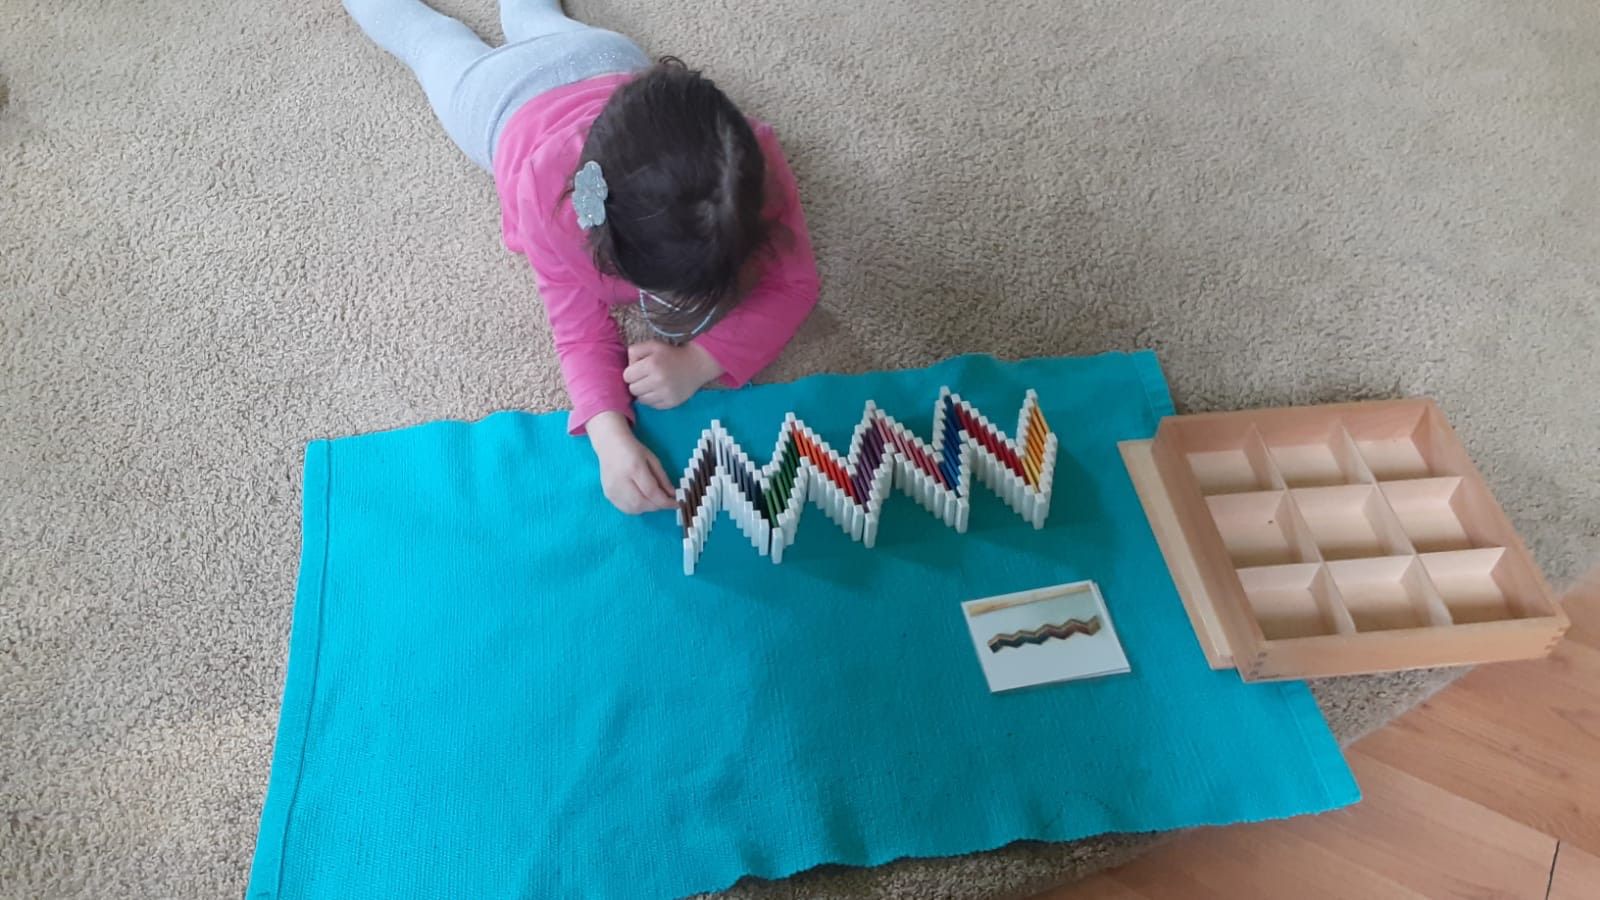 A child busy working with color box; grading the color tablets from darkest to lightest while making a specific pattern after referring to the control card.